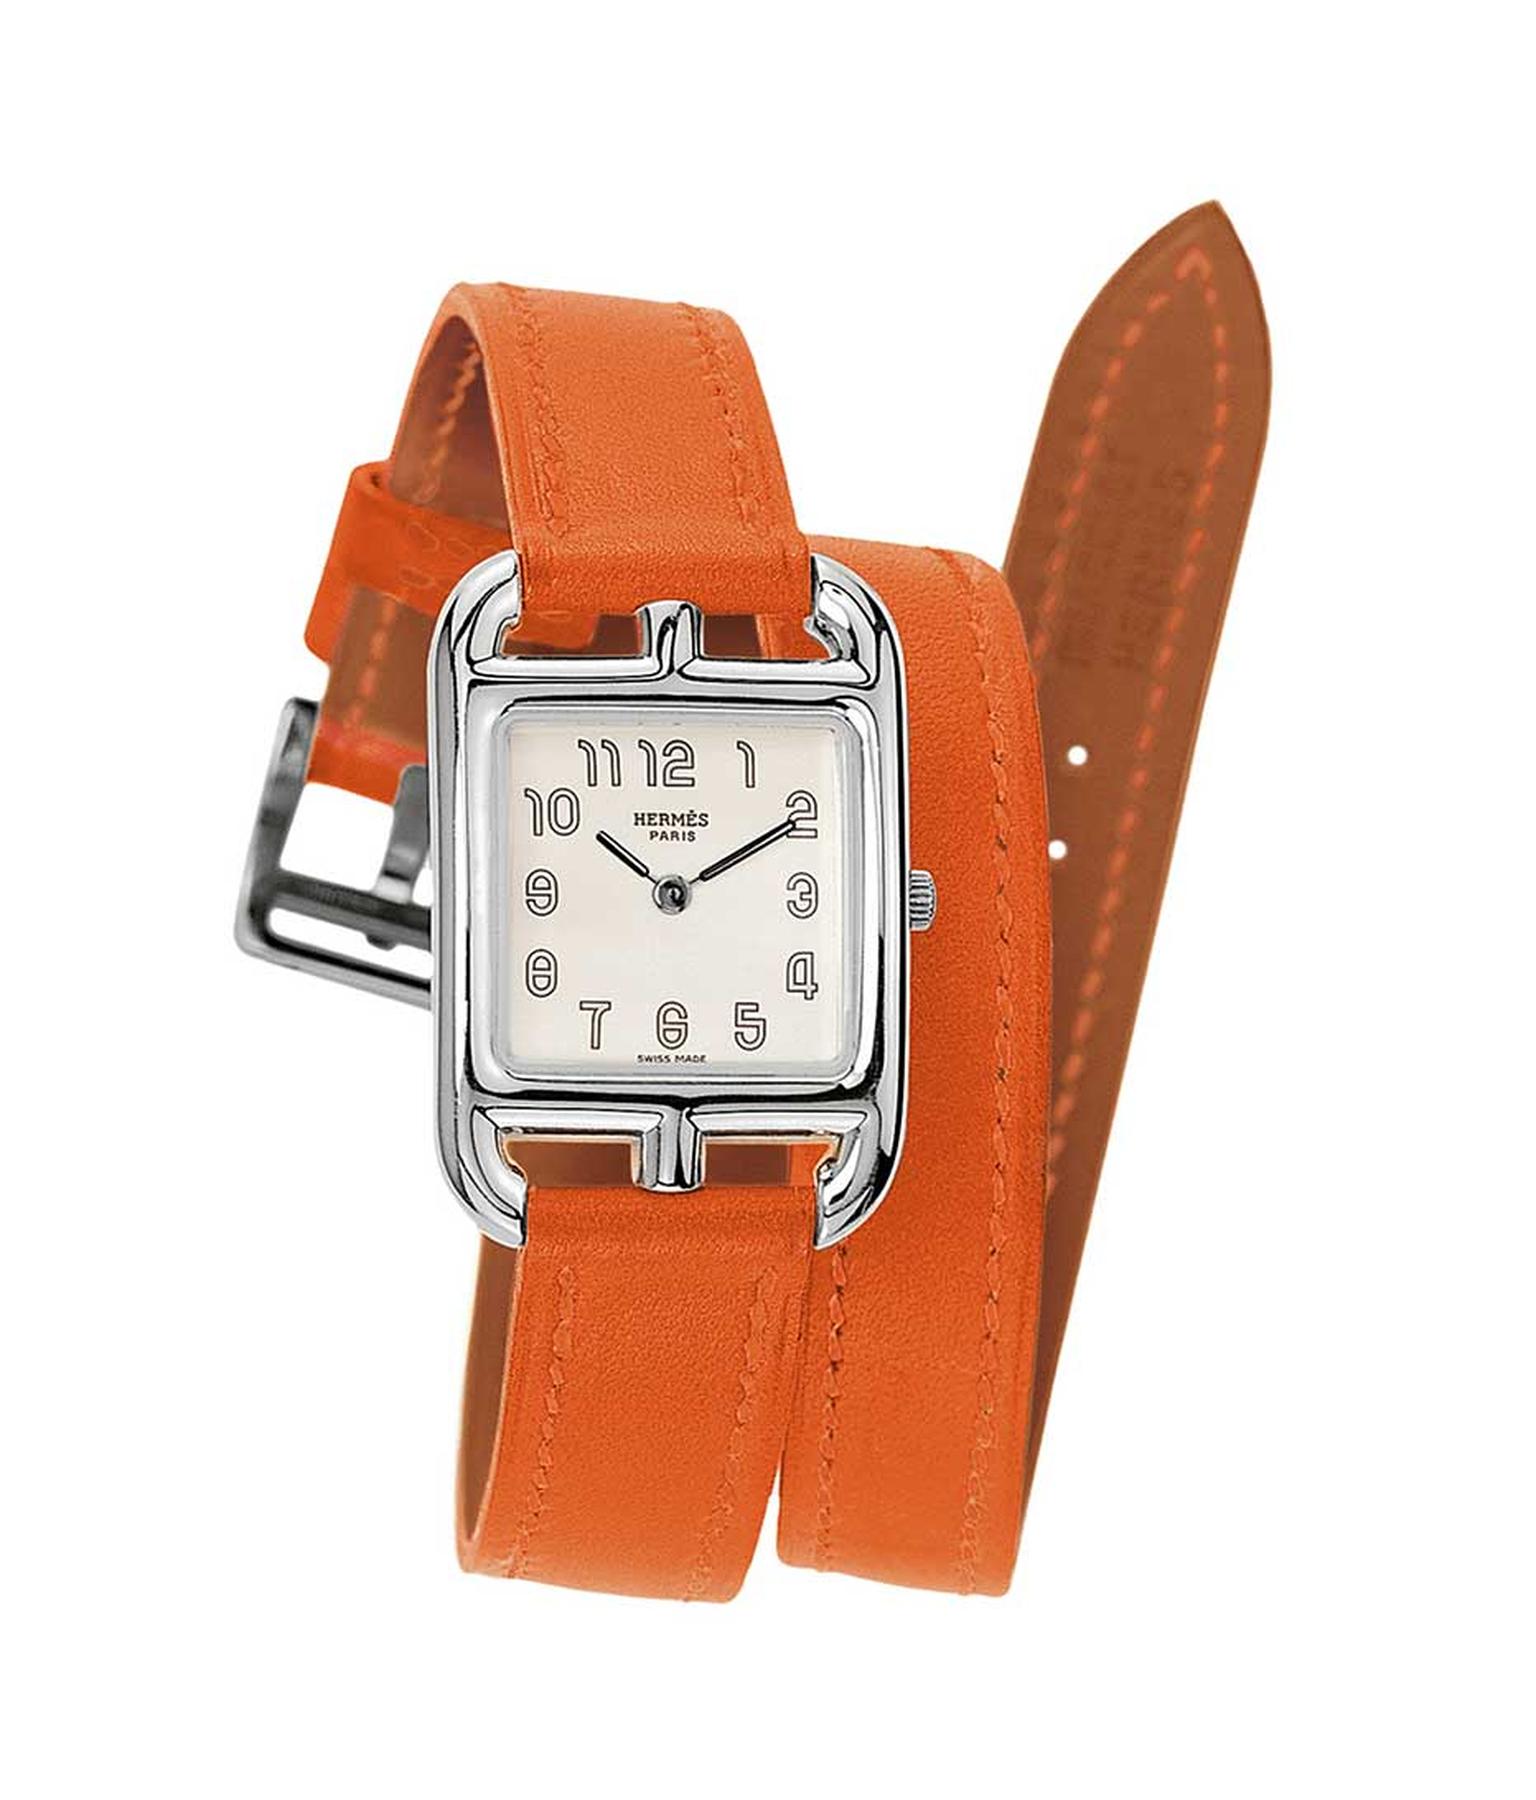 The Hermès Cape Cod Tonneau GM Silver watch is made in Hermès’ new patented silver alloy, with a super soft and supple burnt orange Hermès leather strap that wraps twice around the wrist (£2,400).